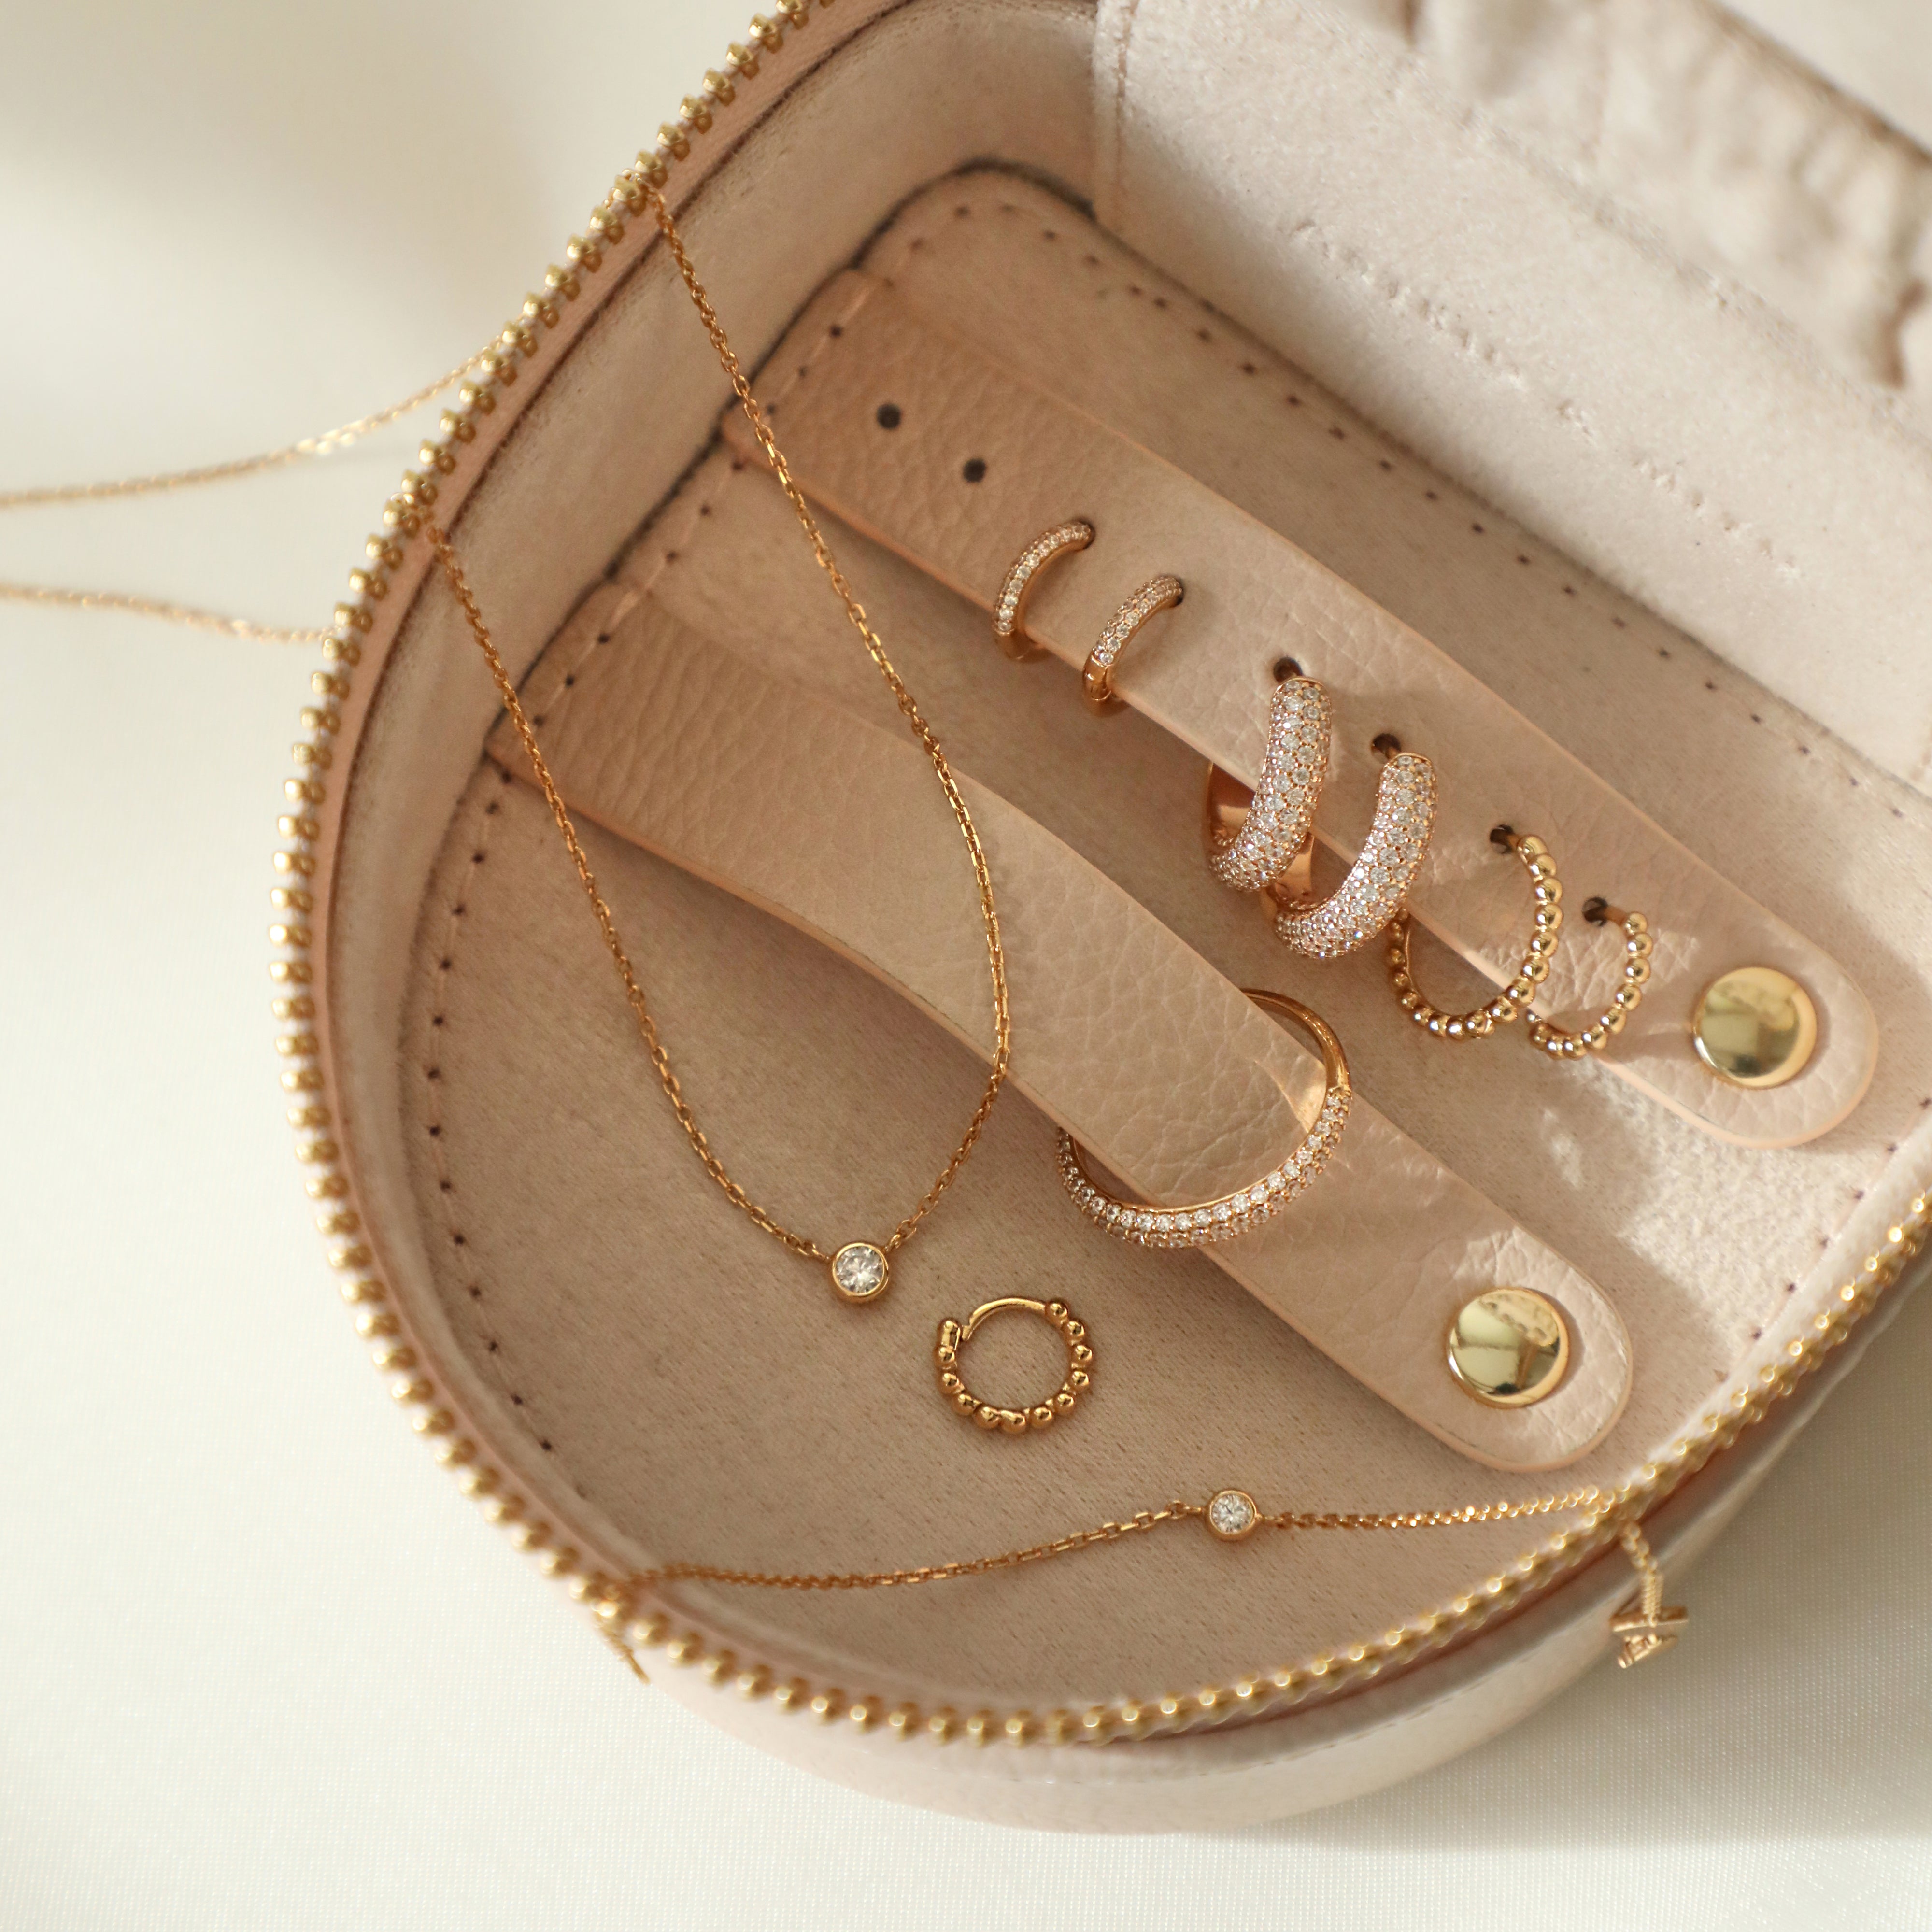 Leather Travel Jewelry Box in Fawn Sand